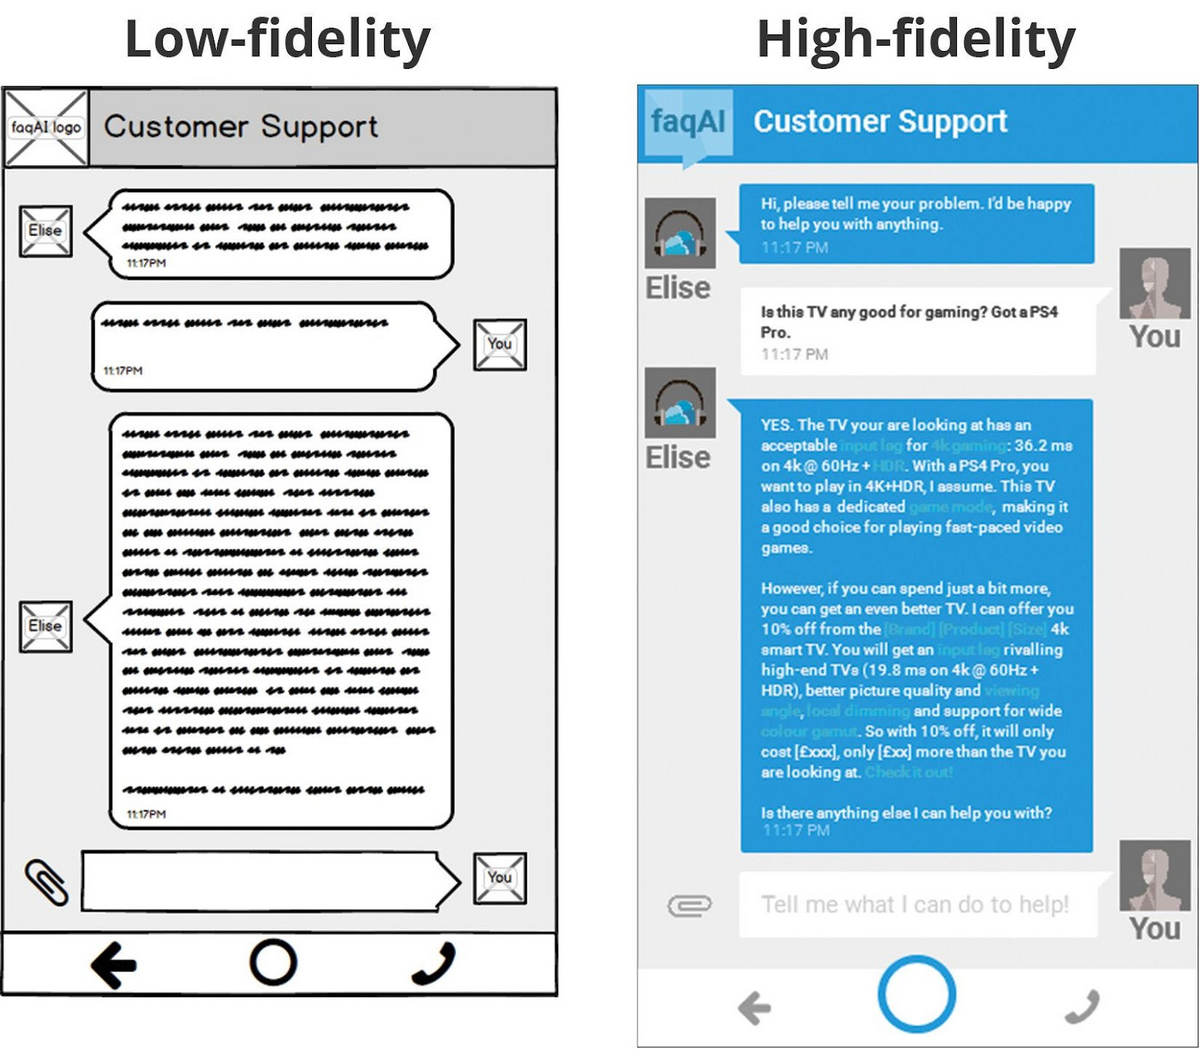 customer support low vs. high fidelity